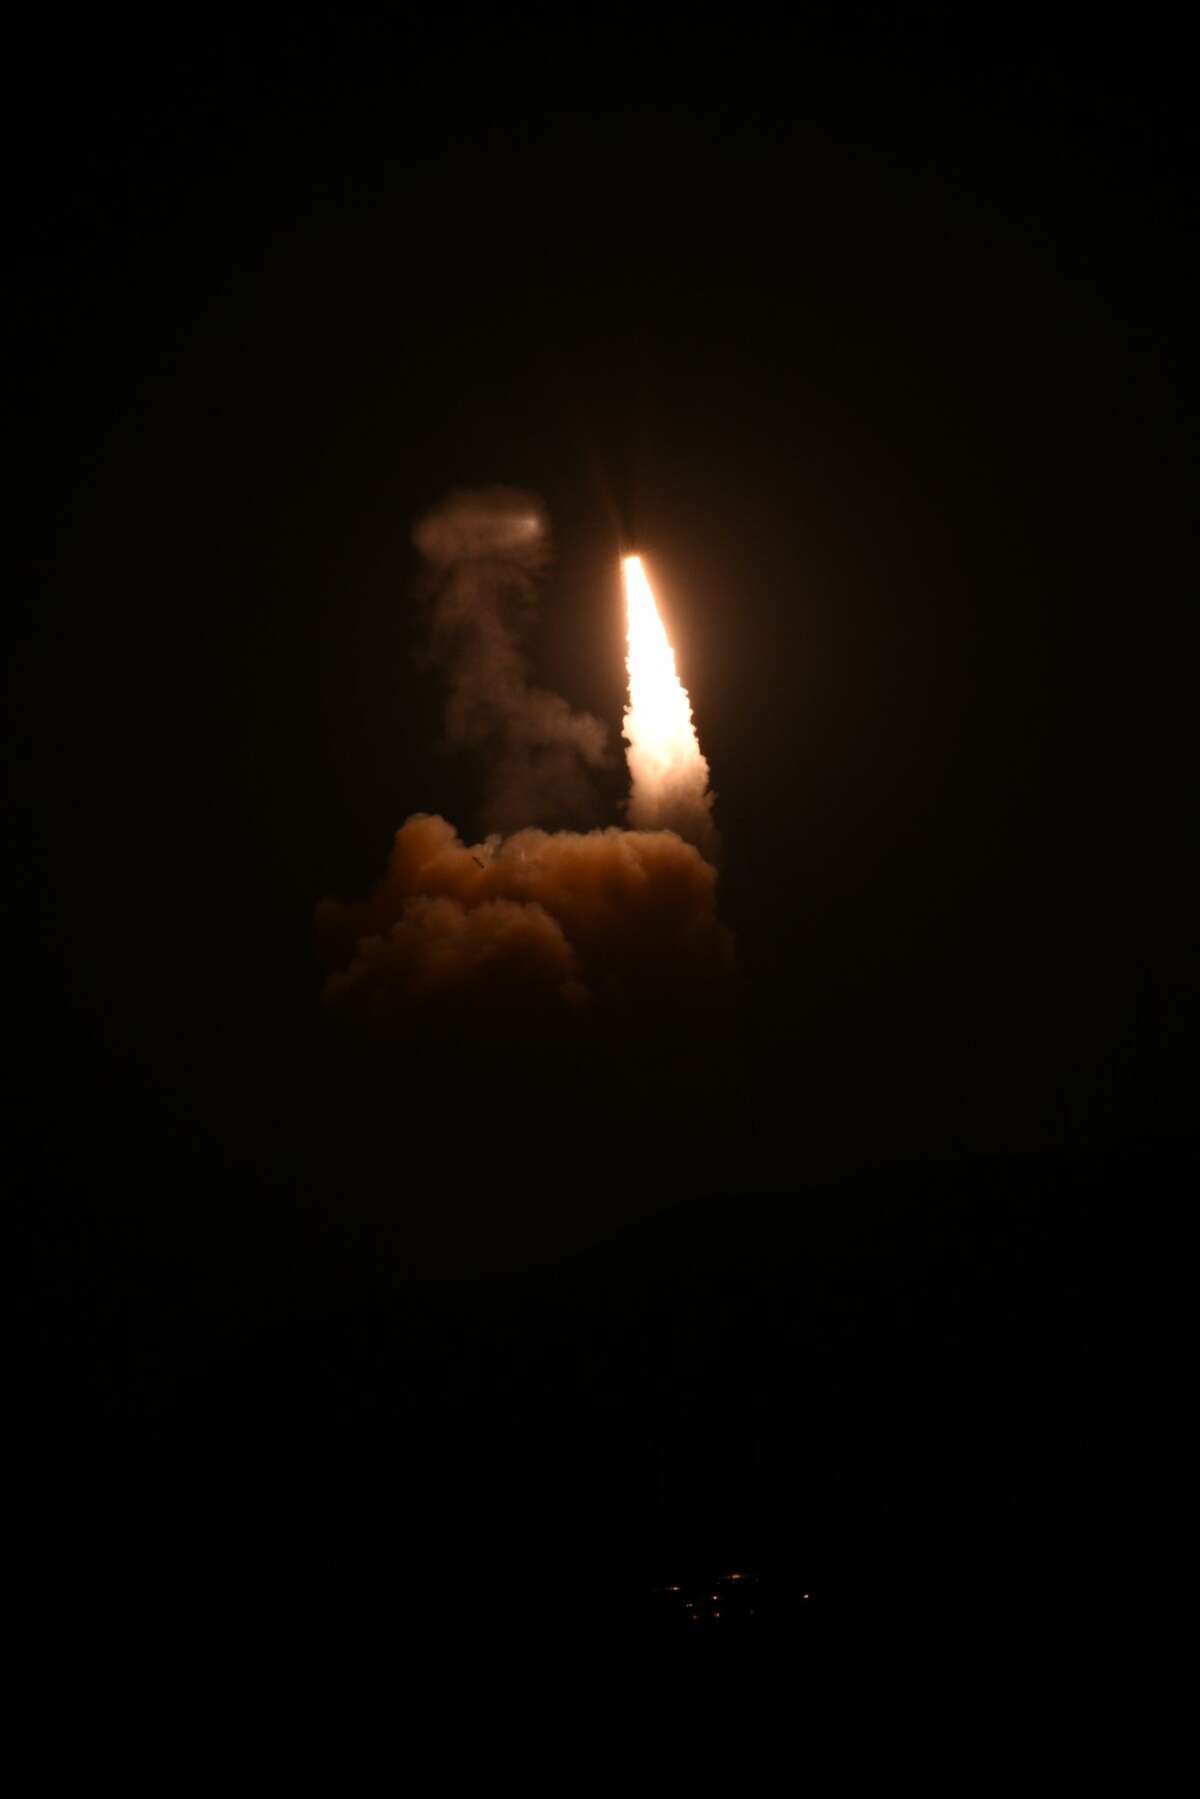 An unarmed Minuteman III intercontinental ballistic missile launches during an operational test at 12:03 a.m., PDT, April 26, from Vandenberg Air Force Base, Calif. The Minuteman system has been in service for 60 years. Through continuous upgrades, including new production versions, improved targeting systems, and enhanced accuracy, today's Minuteman system remains state-of-the art and is capable of meeting all modern challenges.